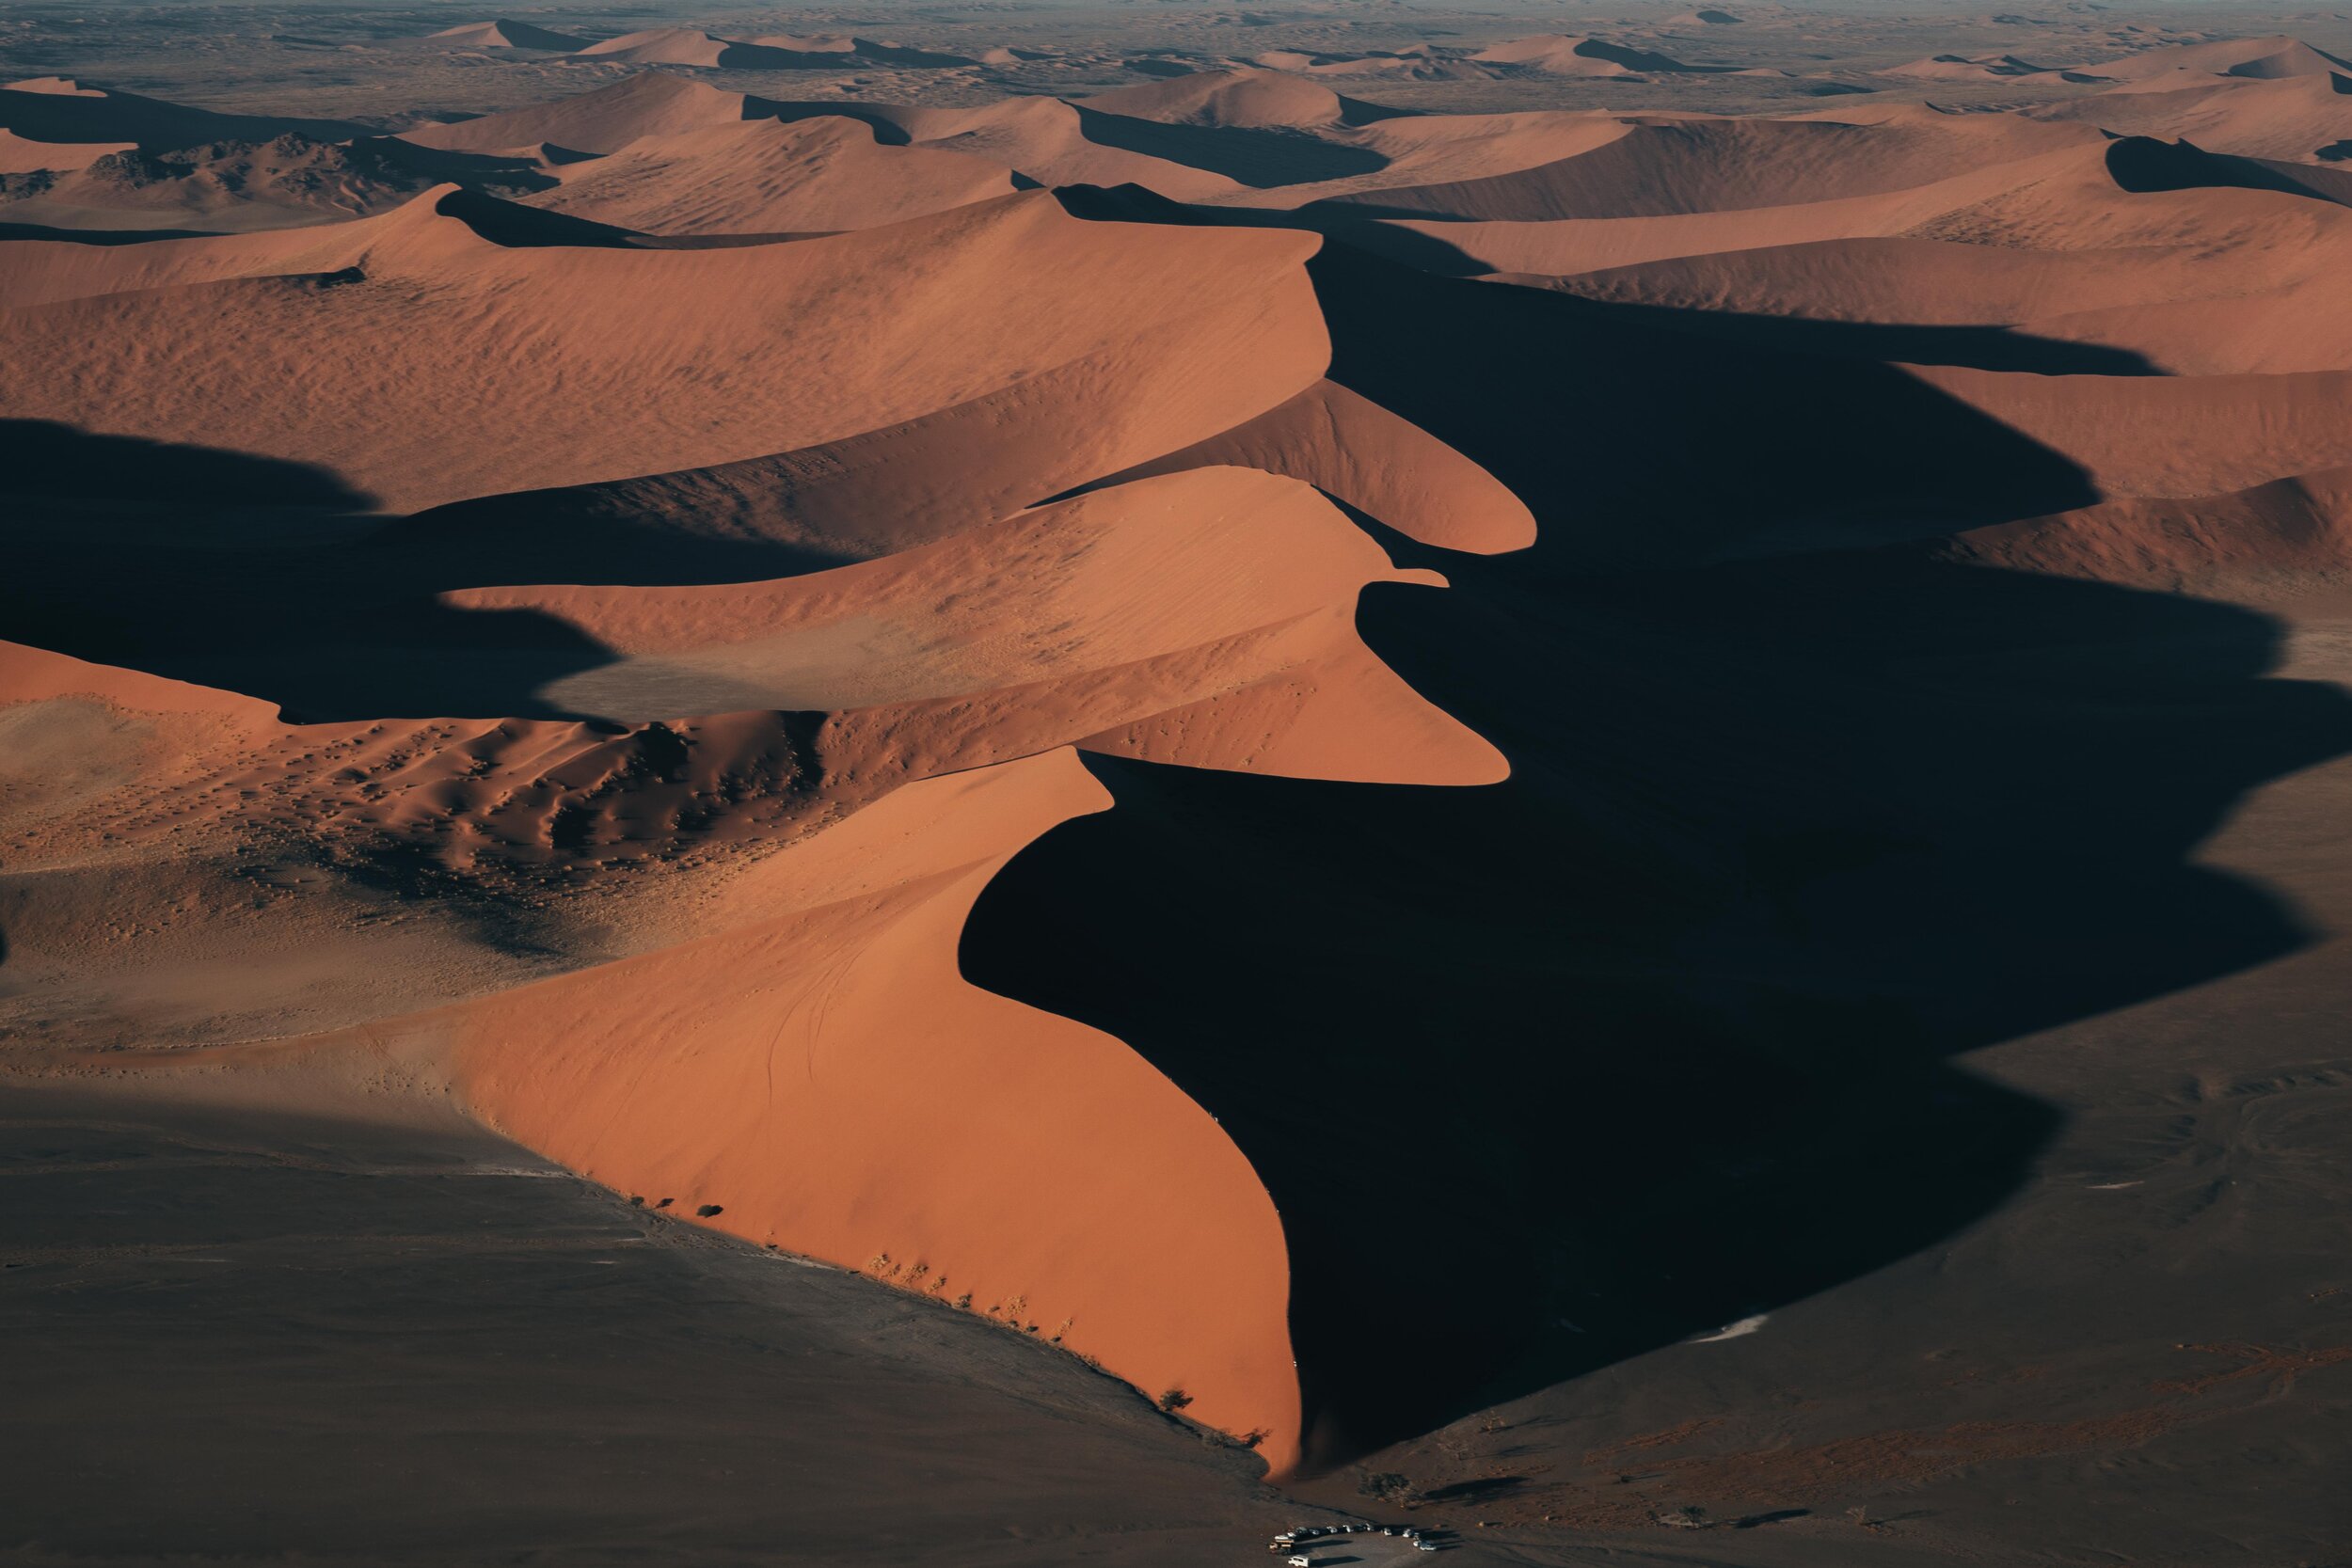  Another famous dune in Sossusvlei: Dune 46, can you spot the hikers? 